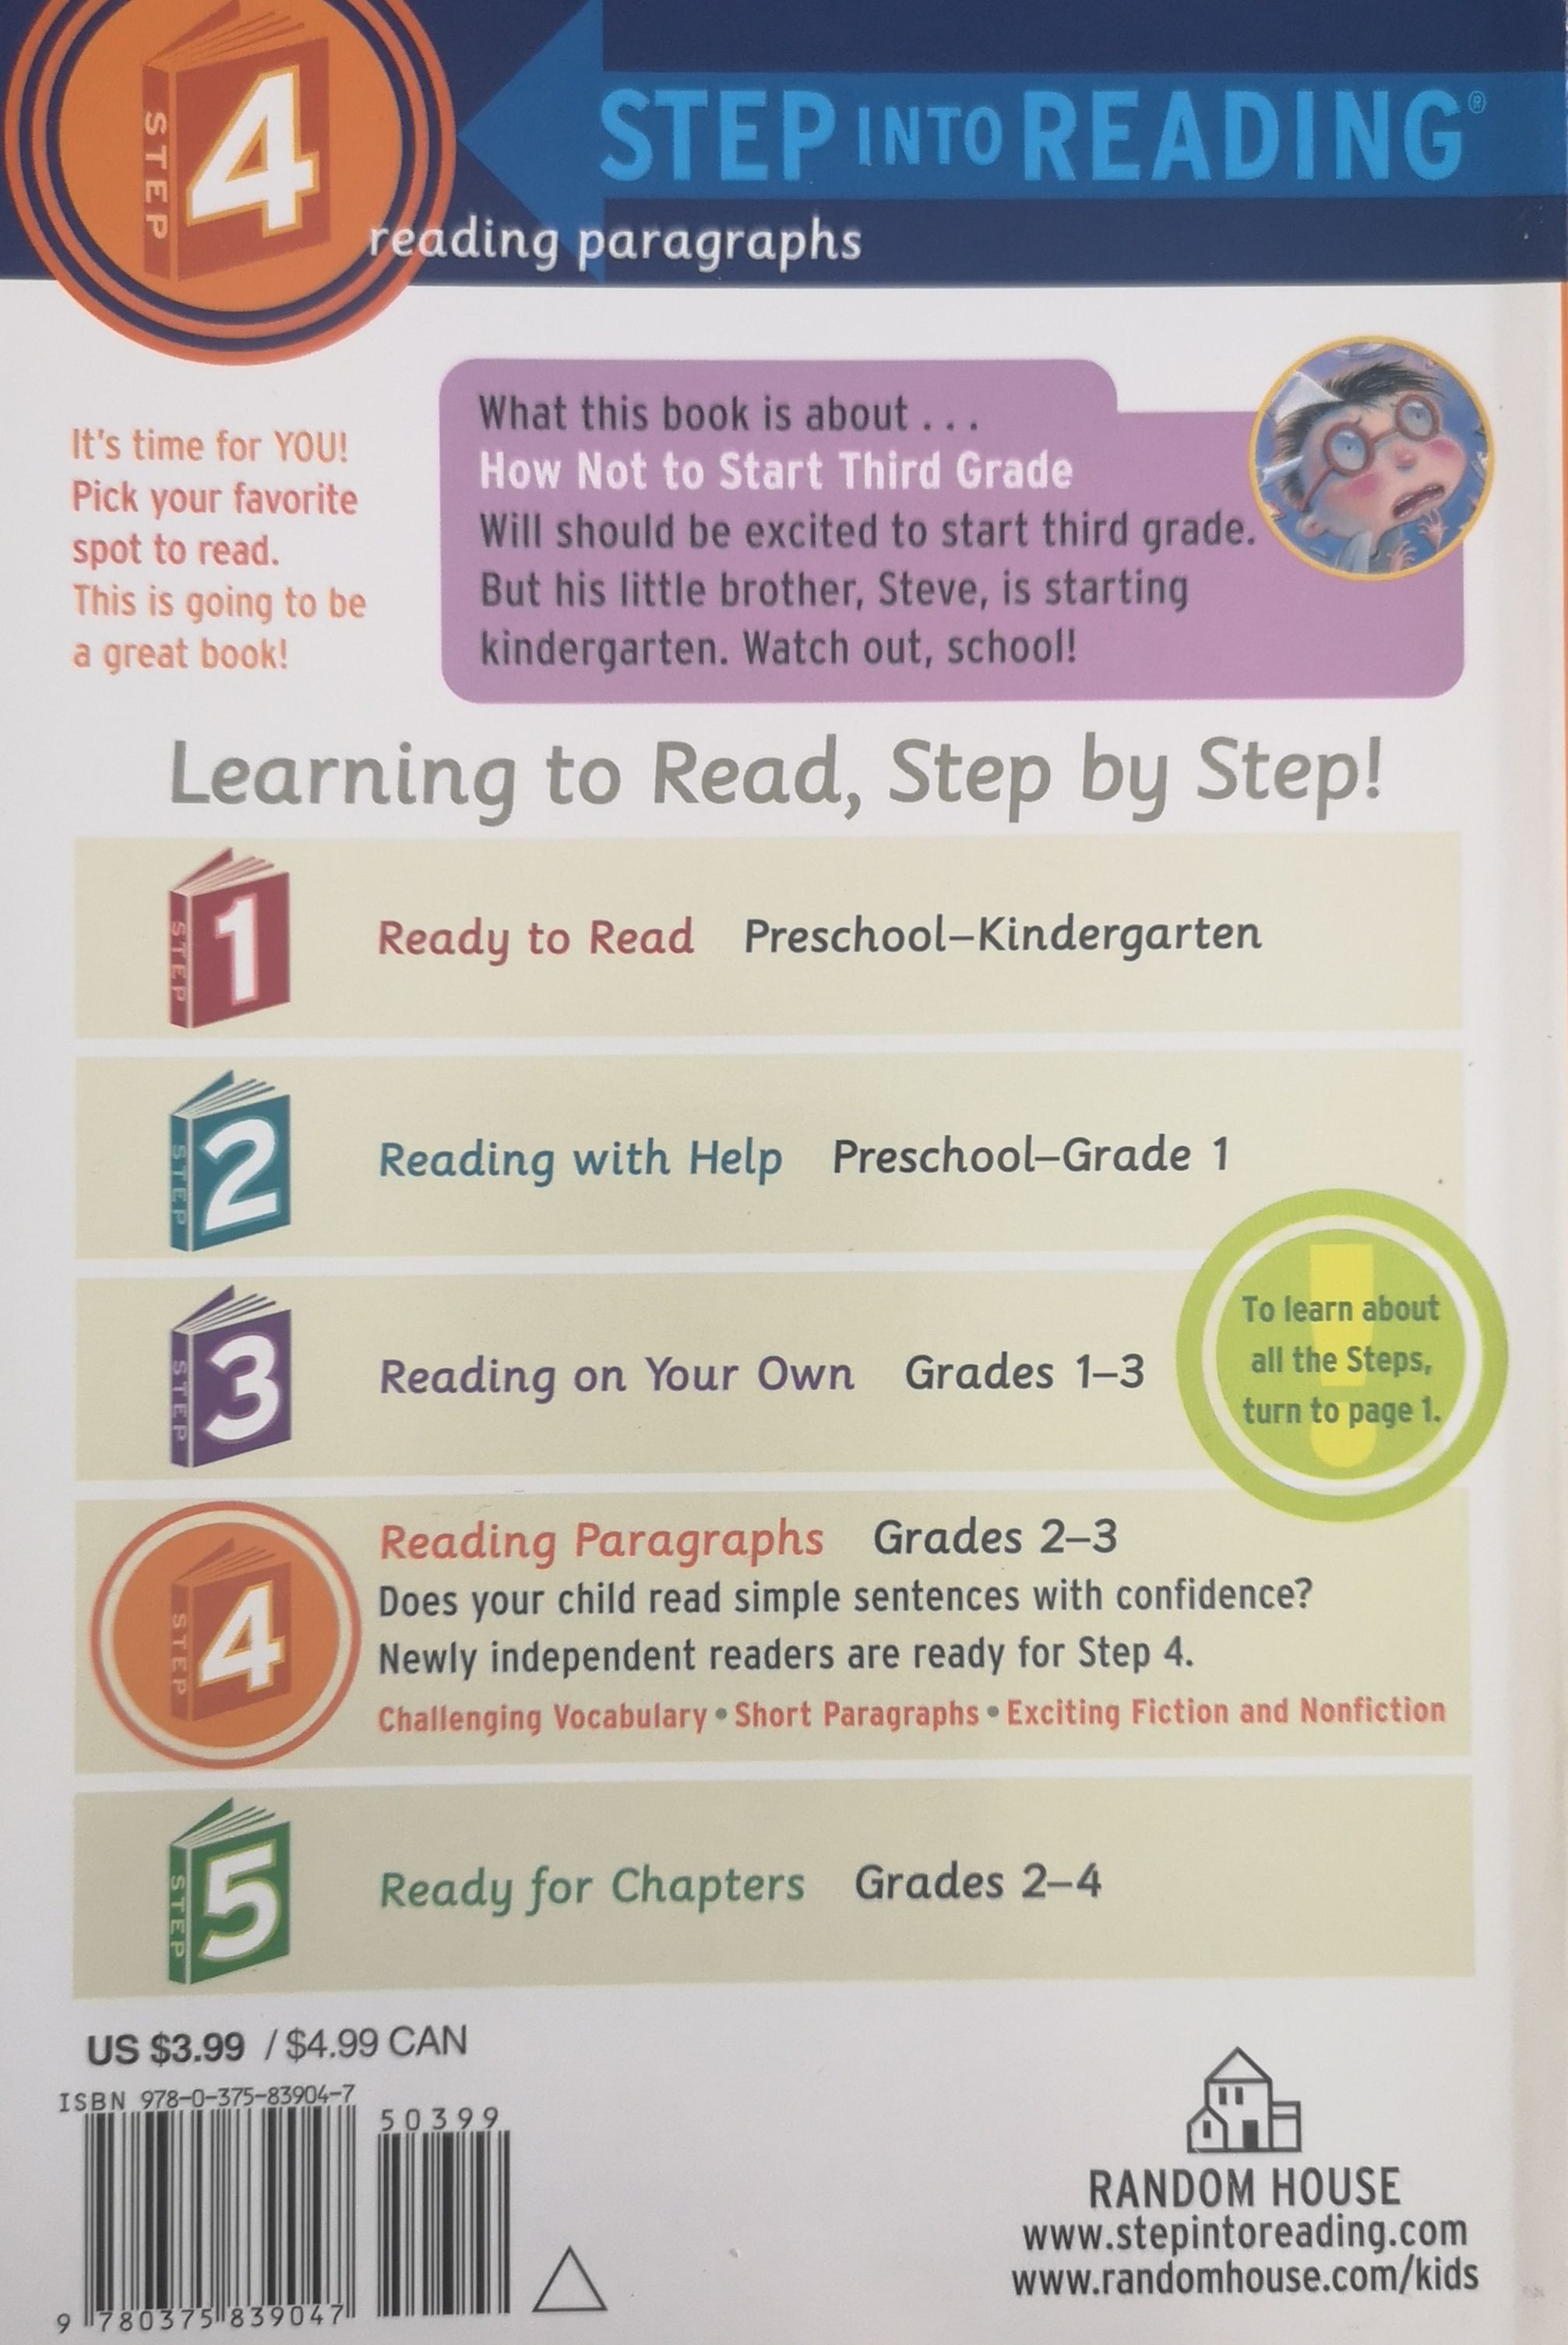 How Not To Start Third Grade - Debbie Palen (Random House Books for Young Readers - Paperback) book collectible [Barcode 9780375839047] - Main Image 2